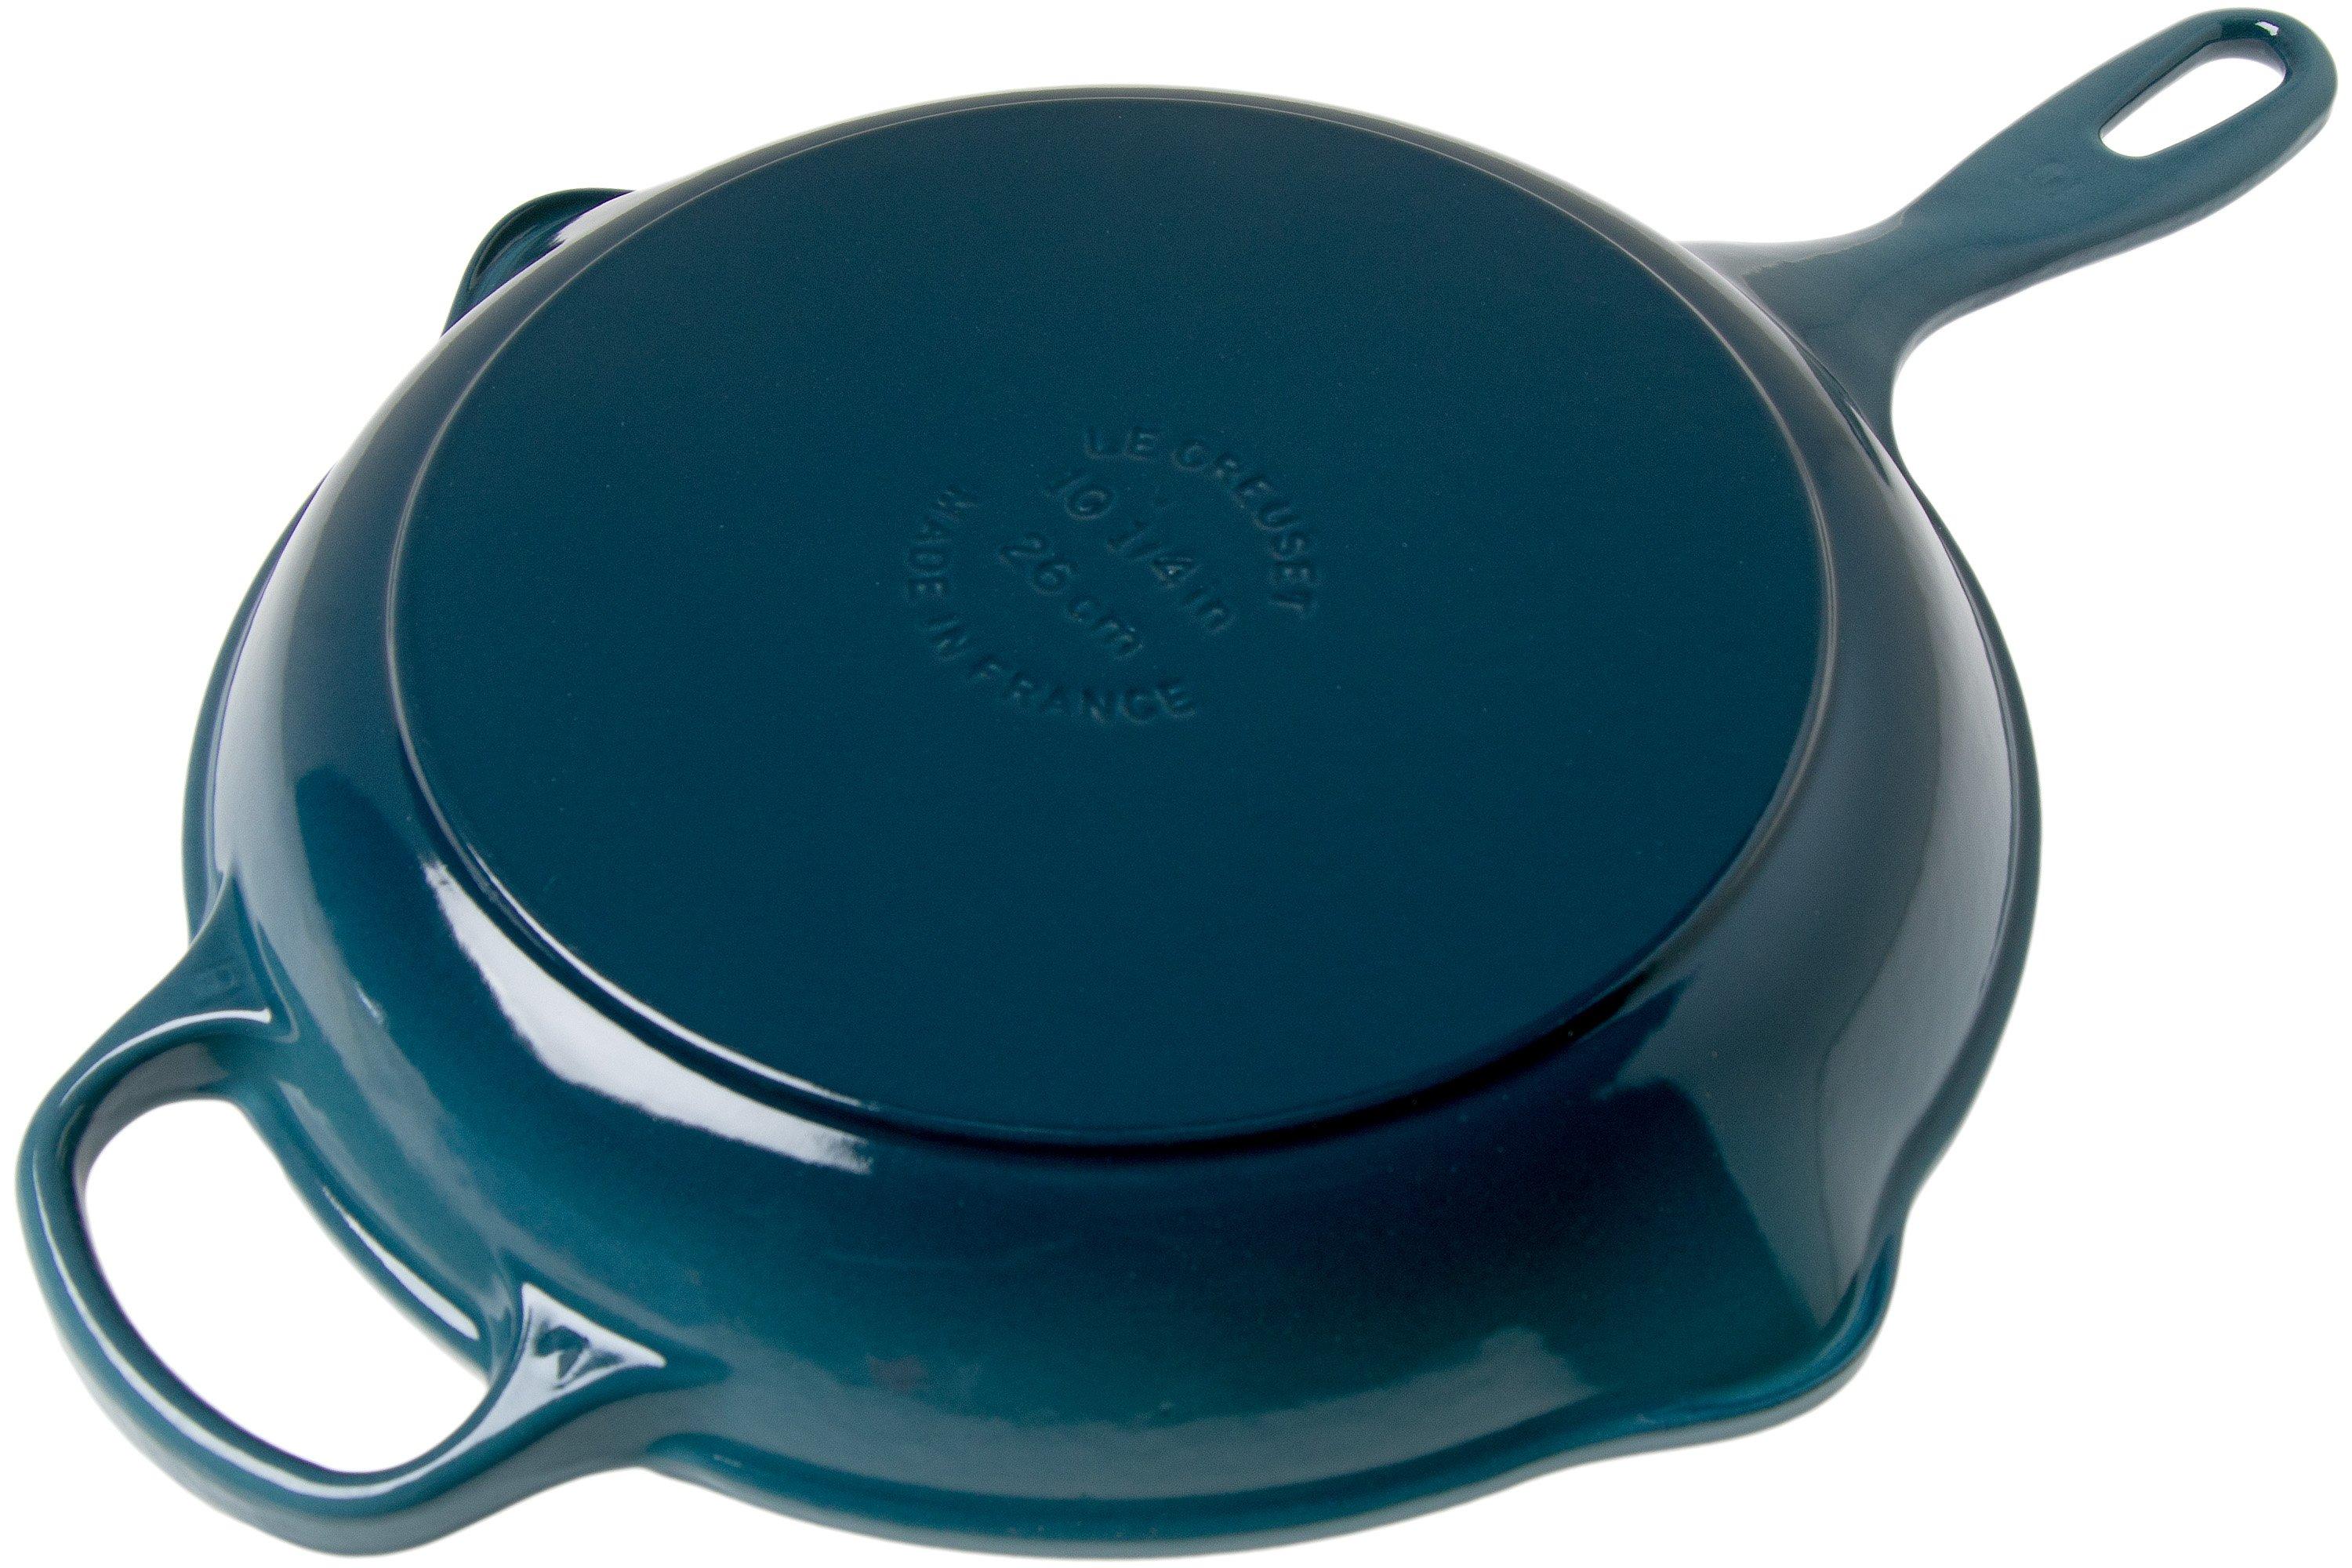 knecht vergroting Sinis Le Creuset grill pan/skillet 26cm round, navy | Advantageously shopping at  Knivesandtools.com